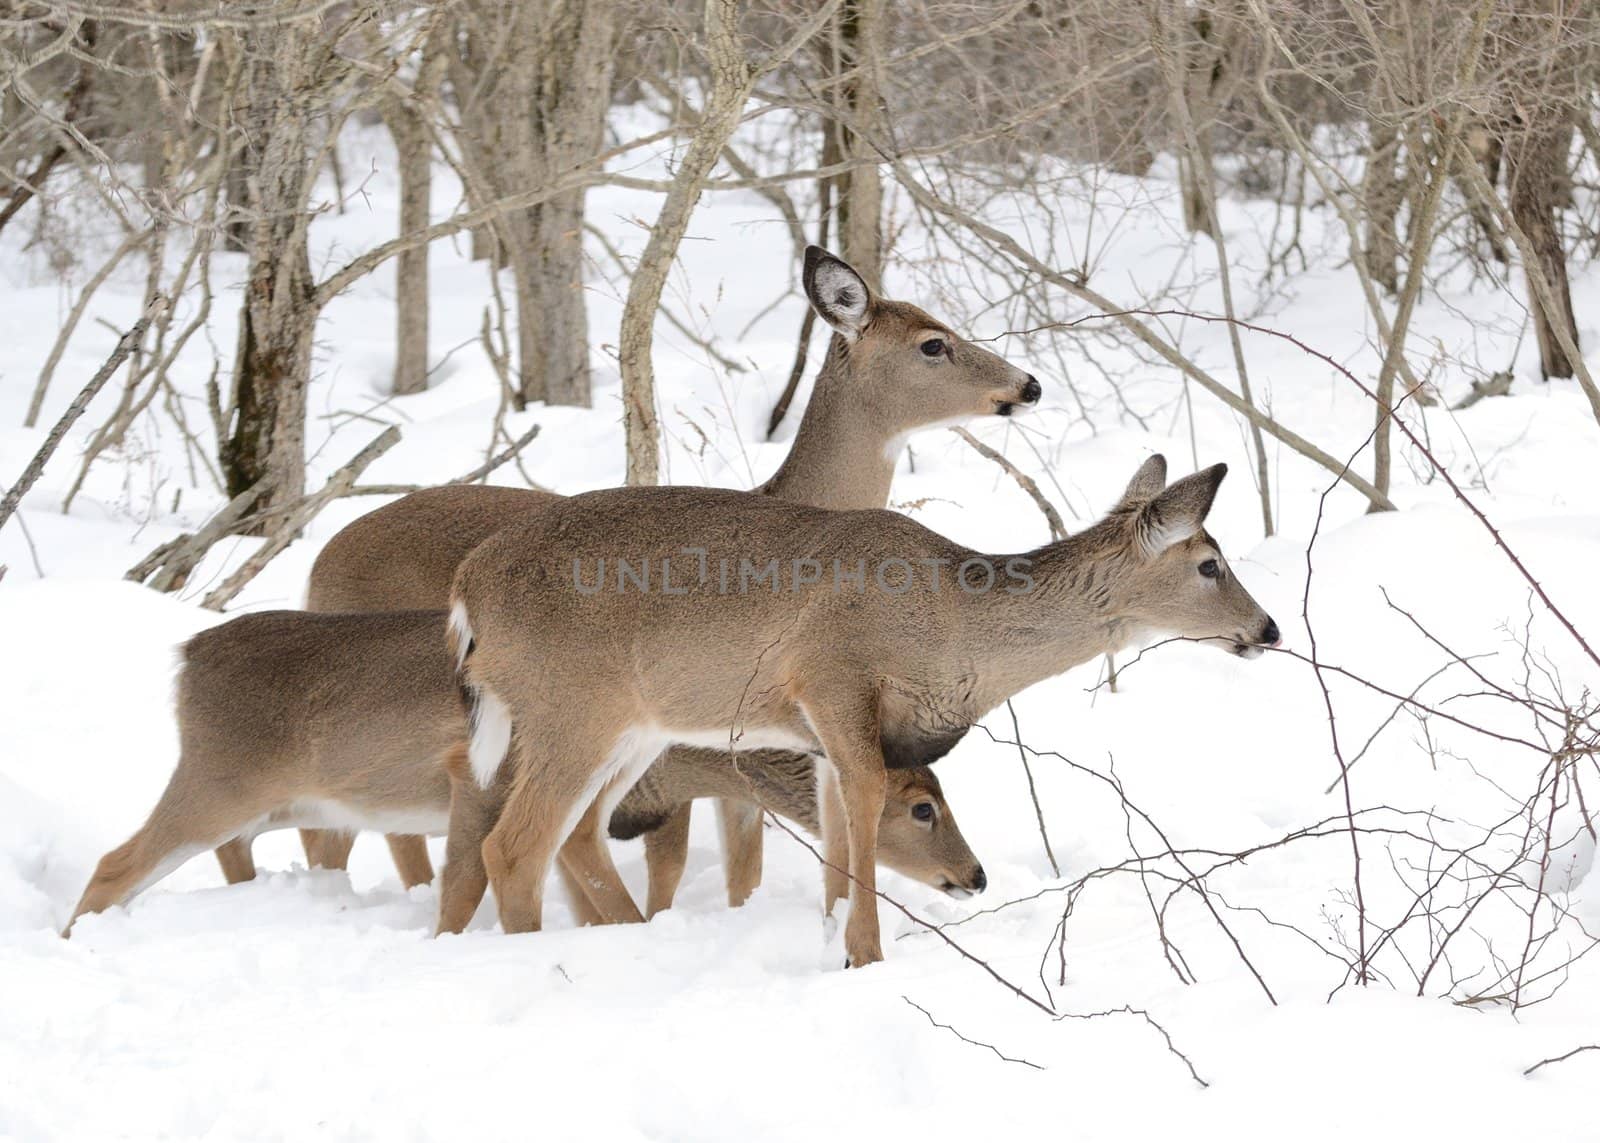 Whitetail deer doe standing in winter snow with two yearlings.